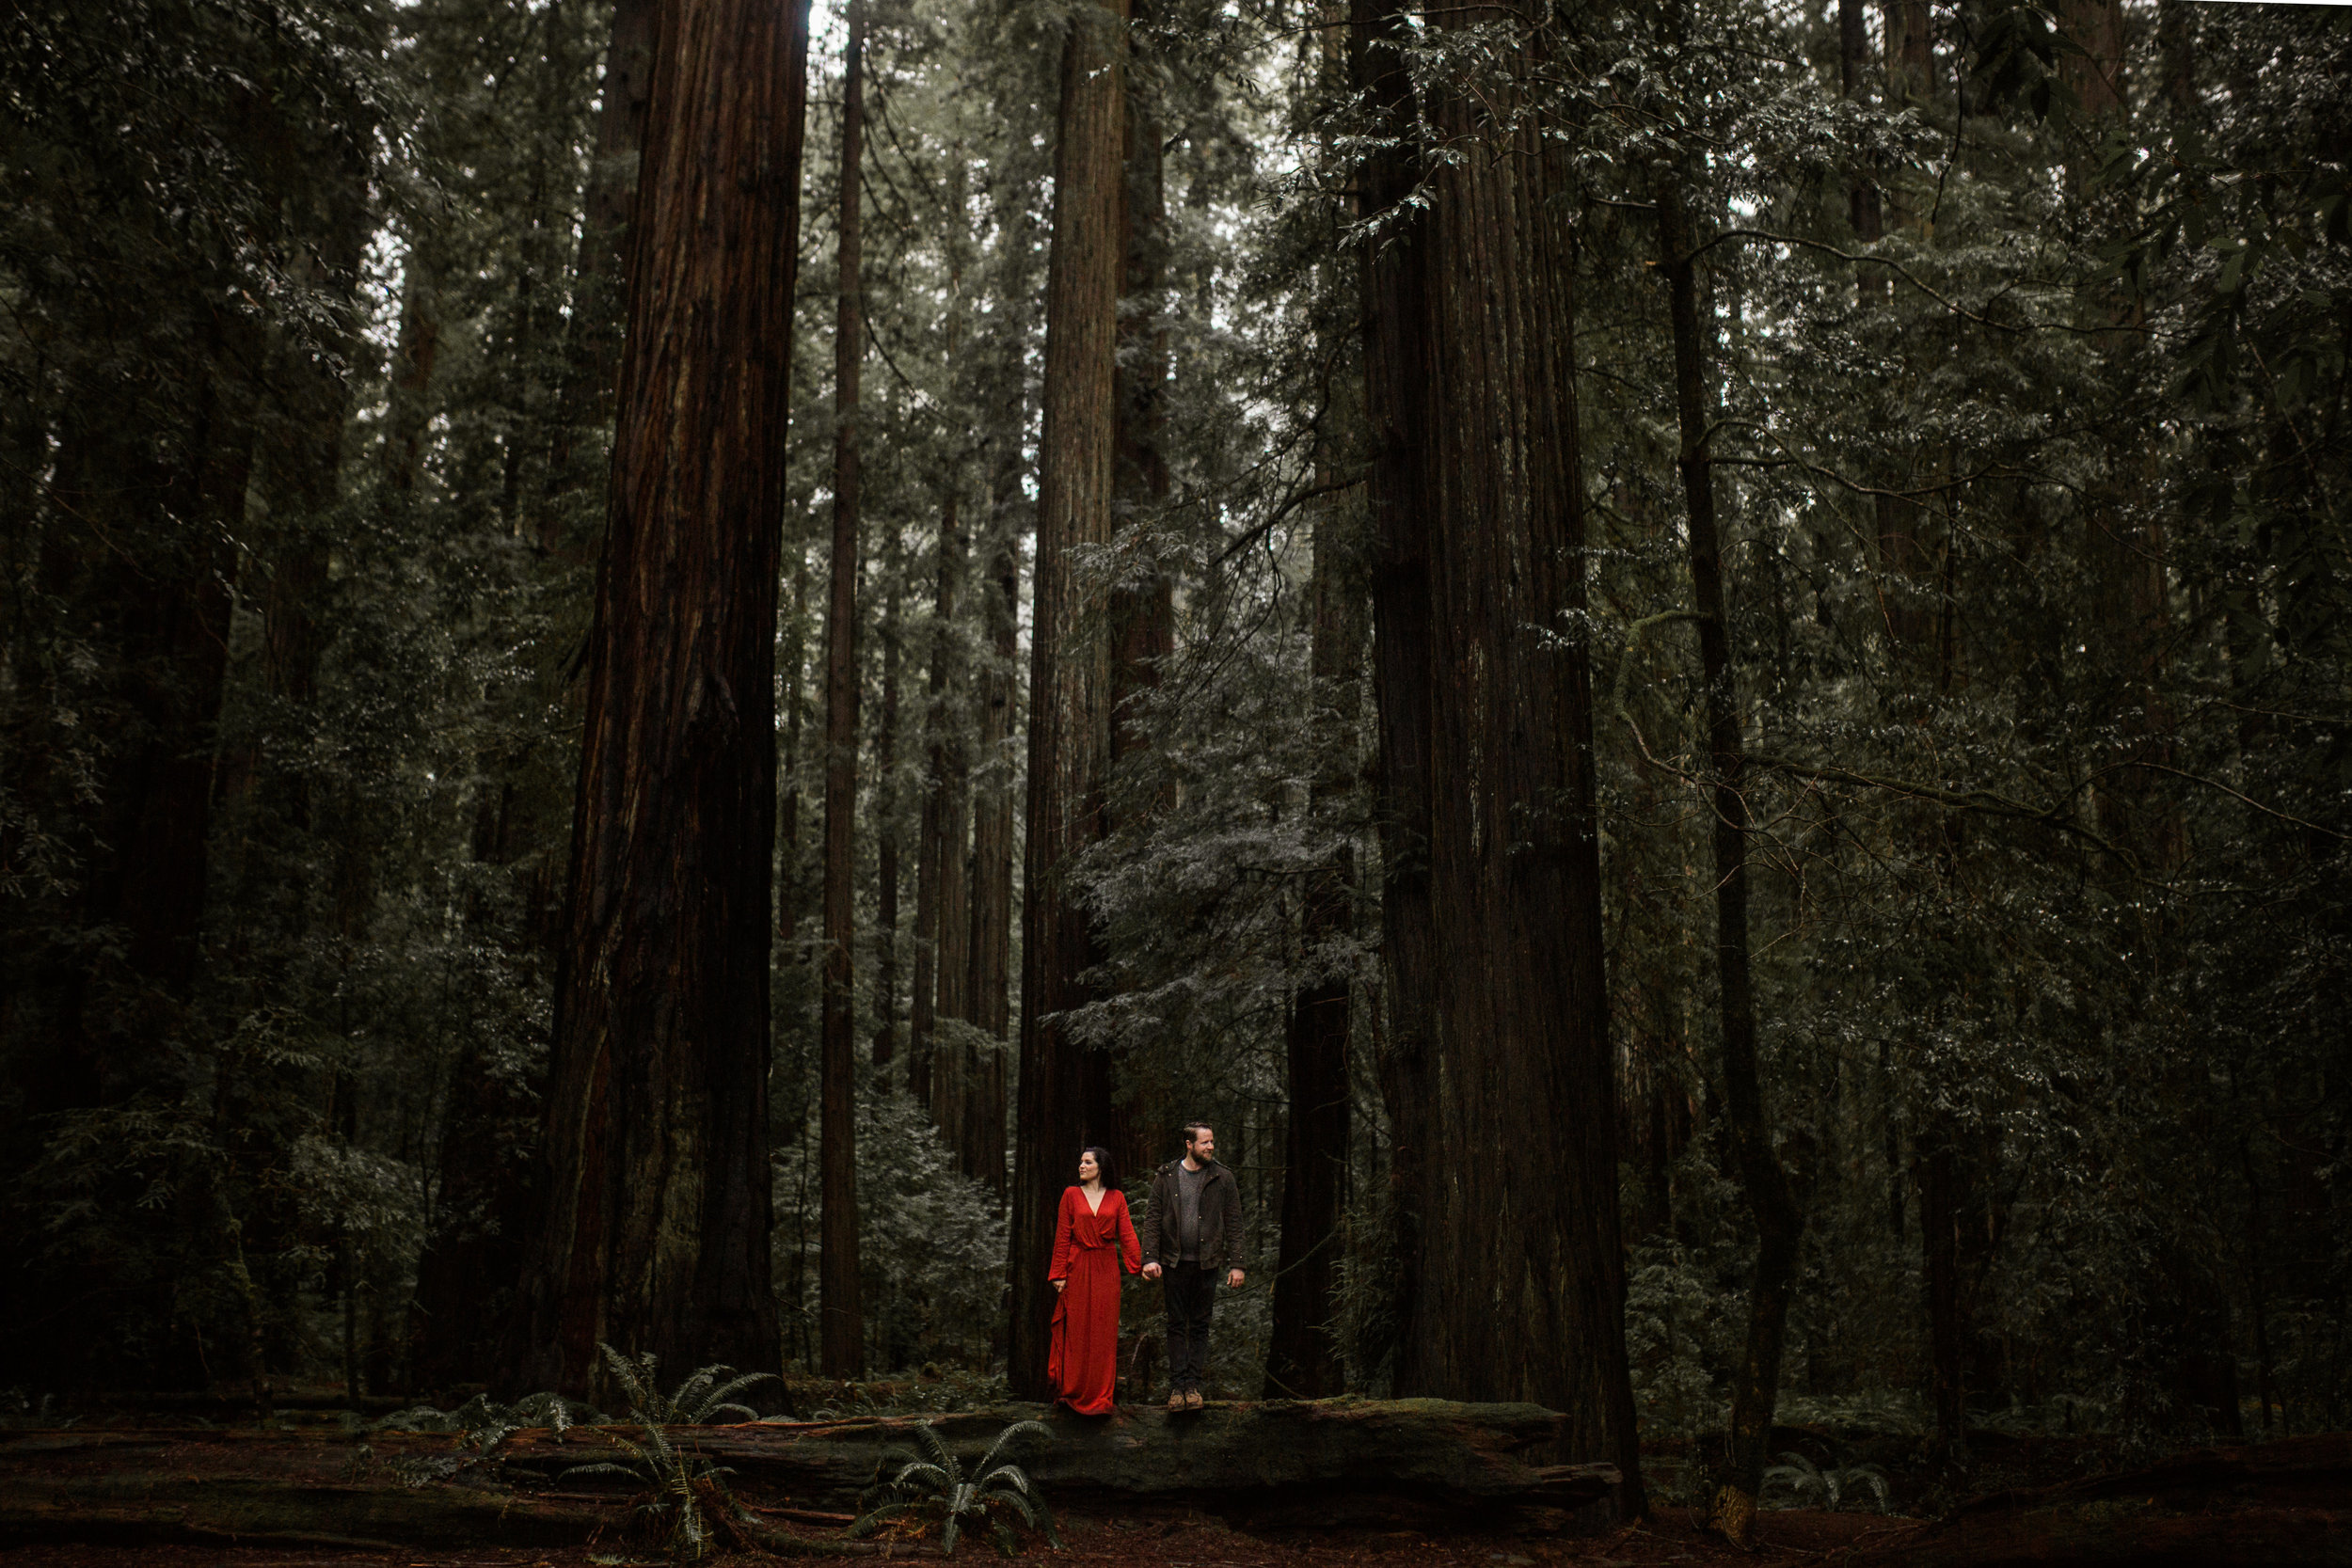 nicole-daacke-photography-redwoods-national-park-forest-rainy-foggy-adventure-engagement-session-humboldt-county-old-growth-redwood-tree-elopement-intimate-wedding-photographer-55.jpg